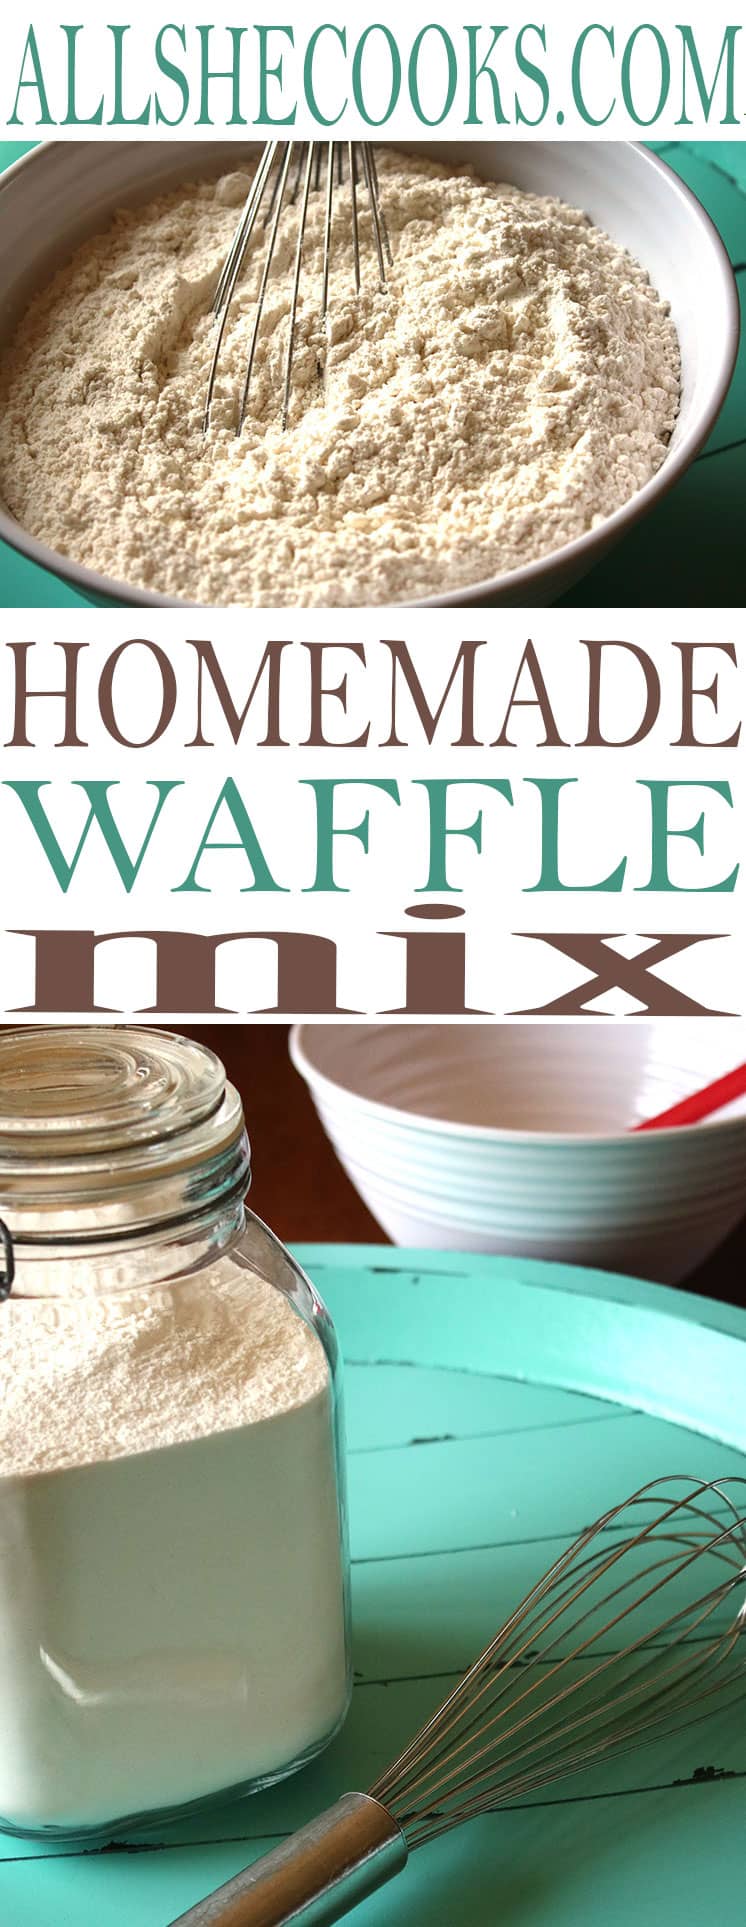 Make Ahead Waffle Mix recipe is what you need for busy morning meals. This waffle mix saves you time and is a healthier-for-you homemade waffle mix recipe.